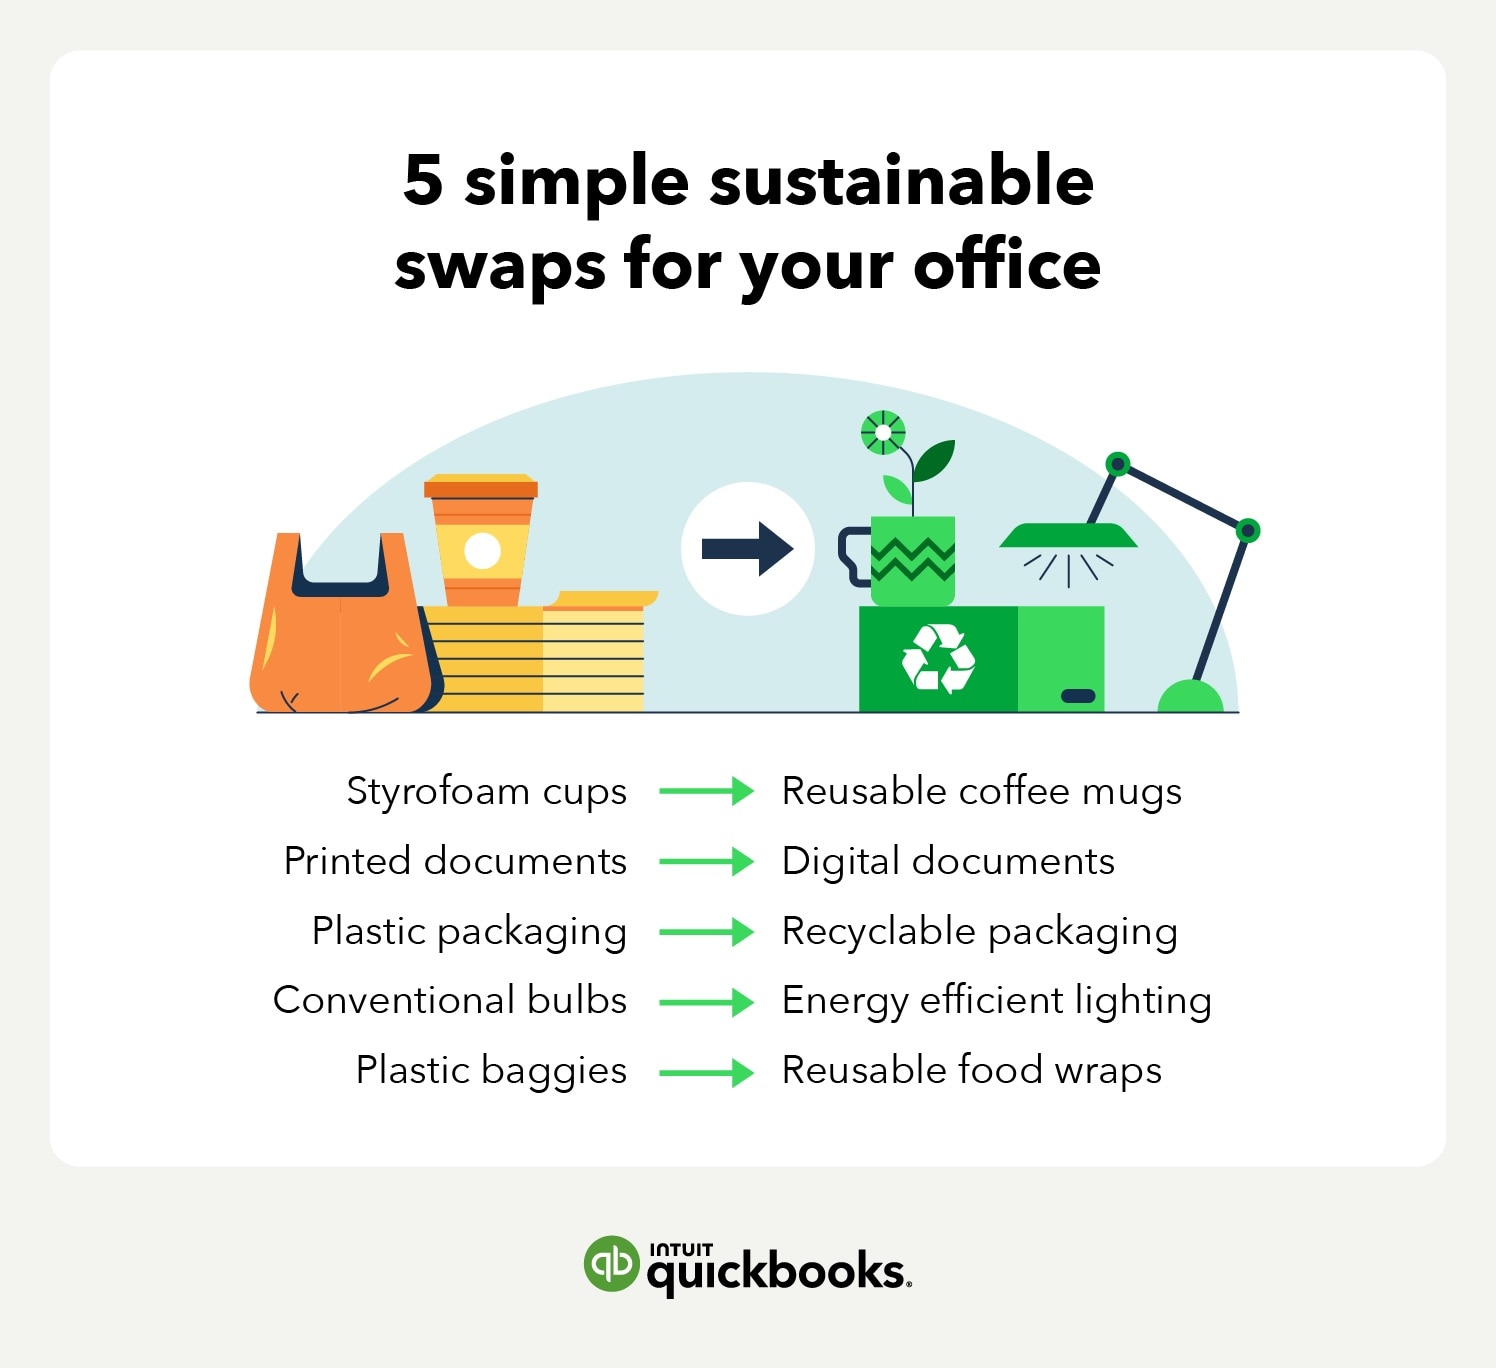 Sustainable swaps for your office.